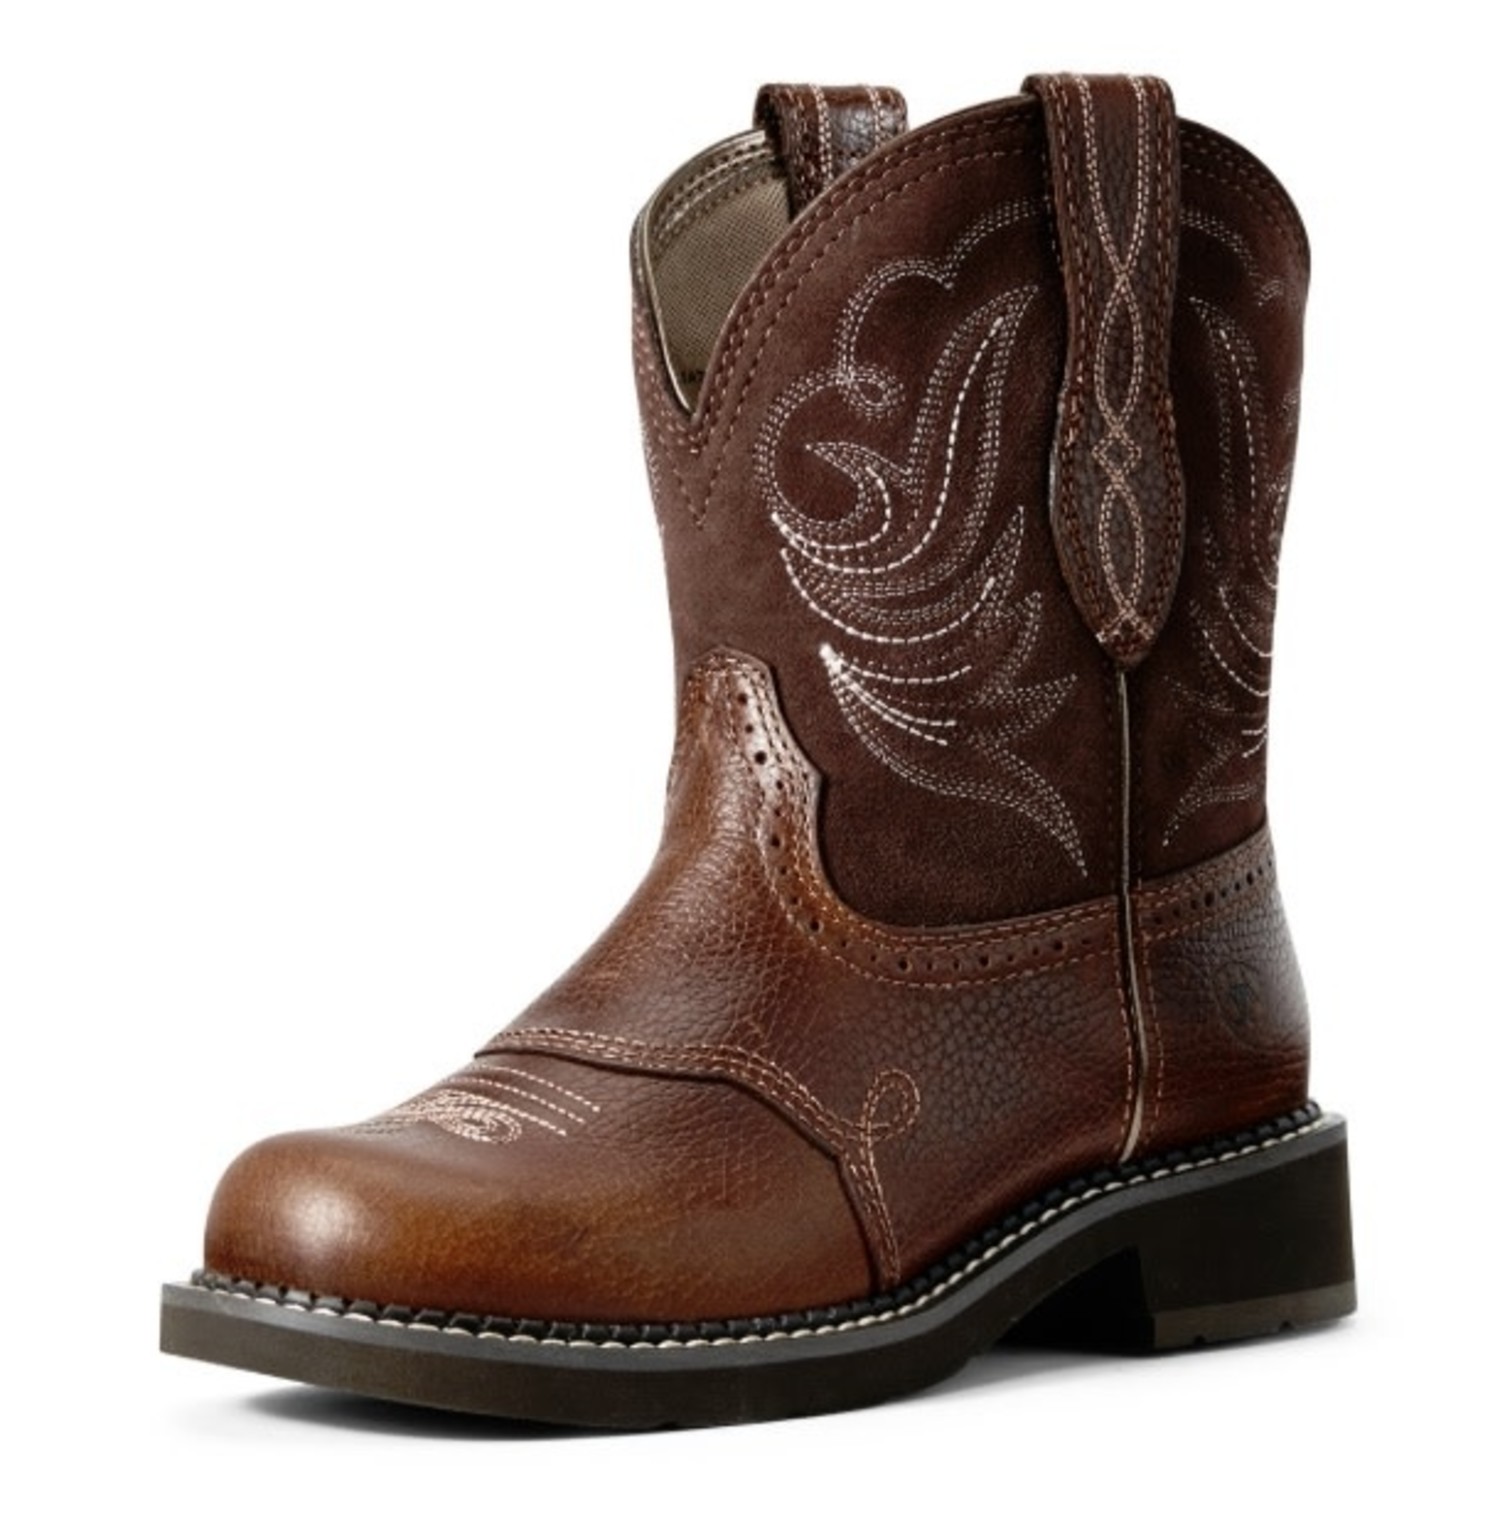 Ariat Boots - Fatbaby Boots & Heritage Boots 